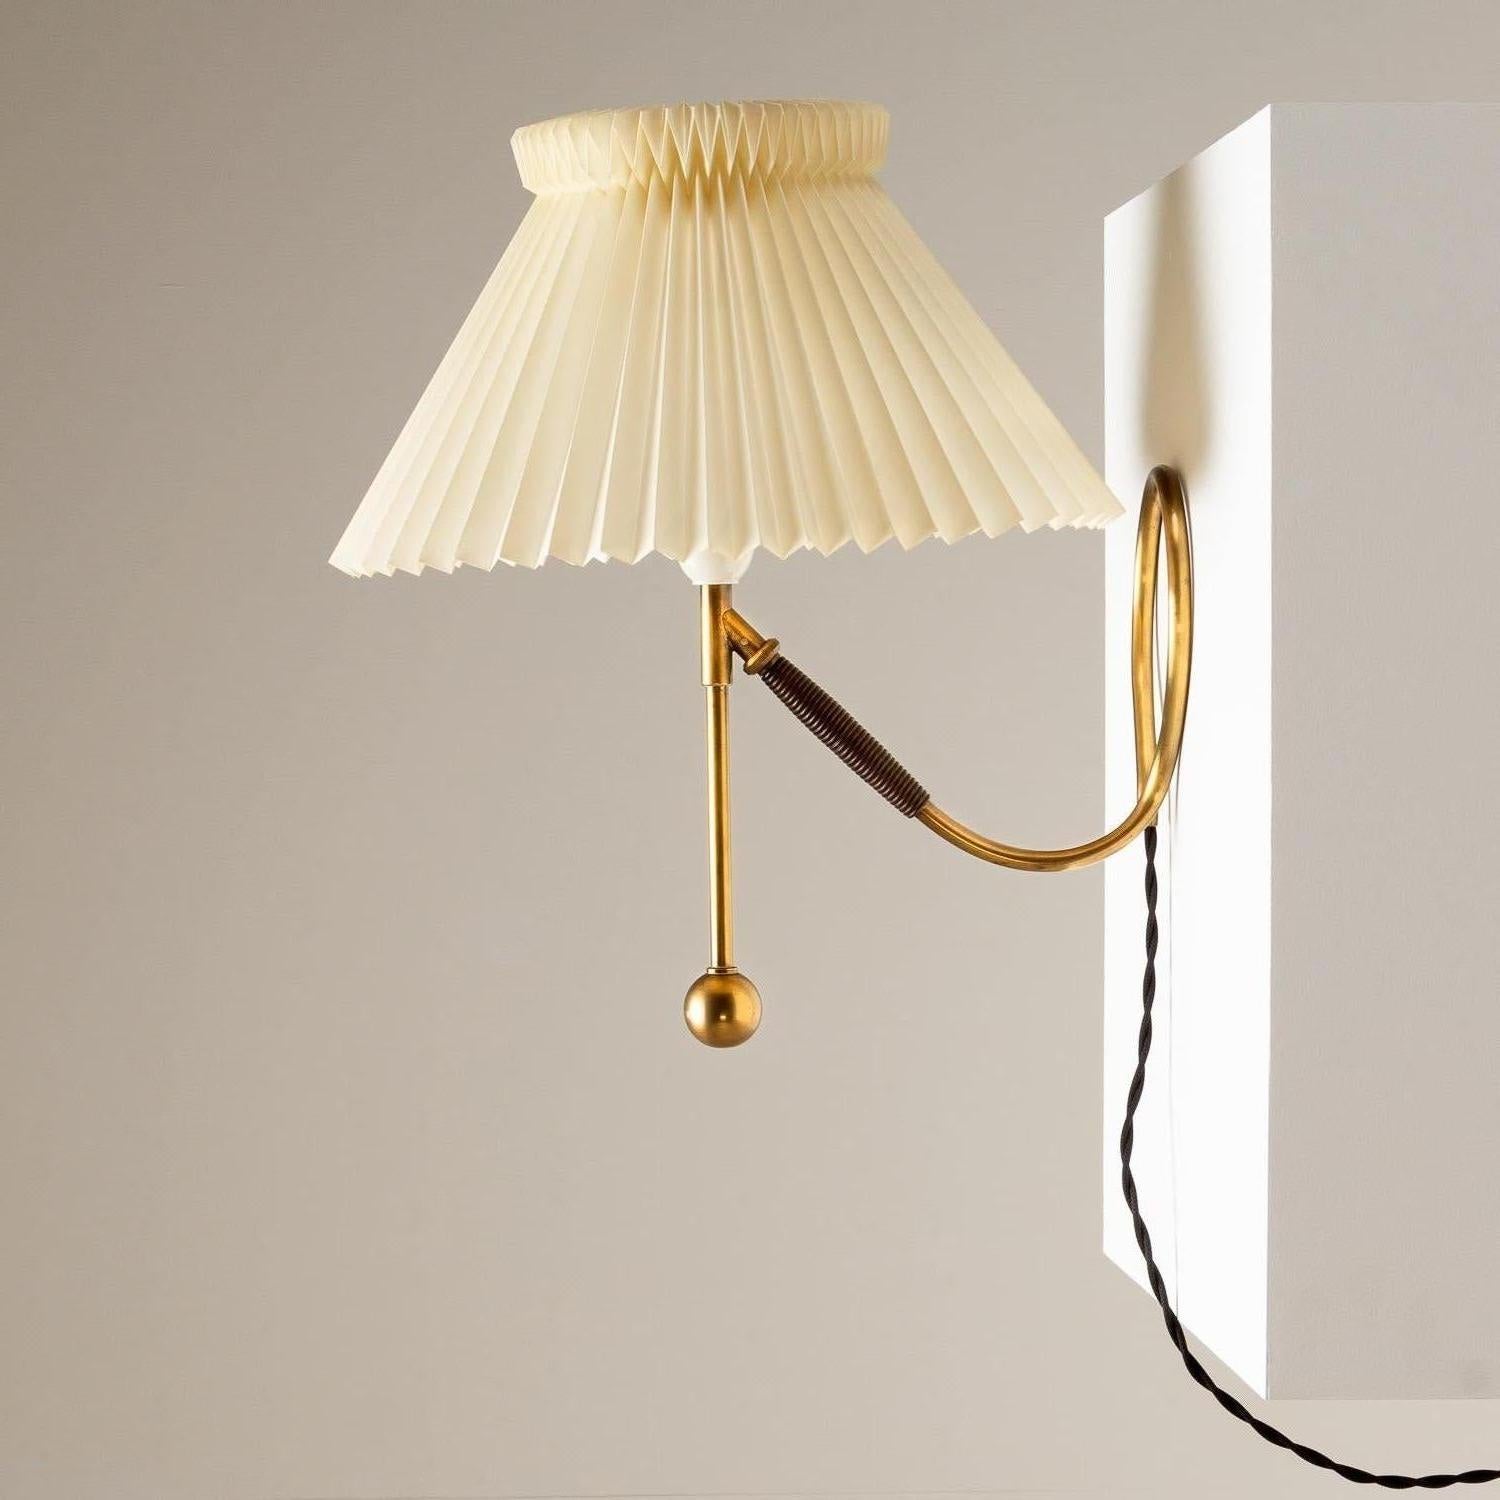 Le Klint 306 Wall or Table Lamp in Brass by Kaare Klint, Denmark, 1950s In Good Condition For Sale In Berkhamsted, GB